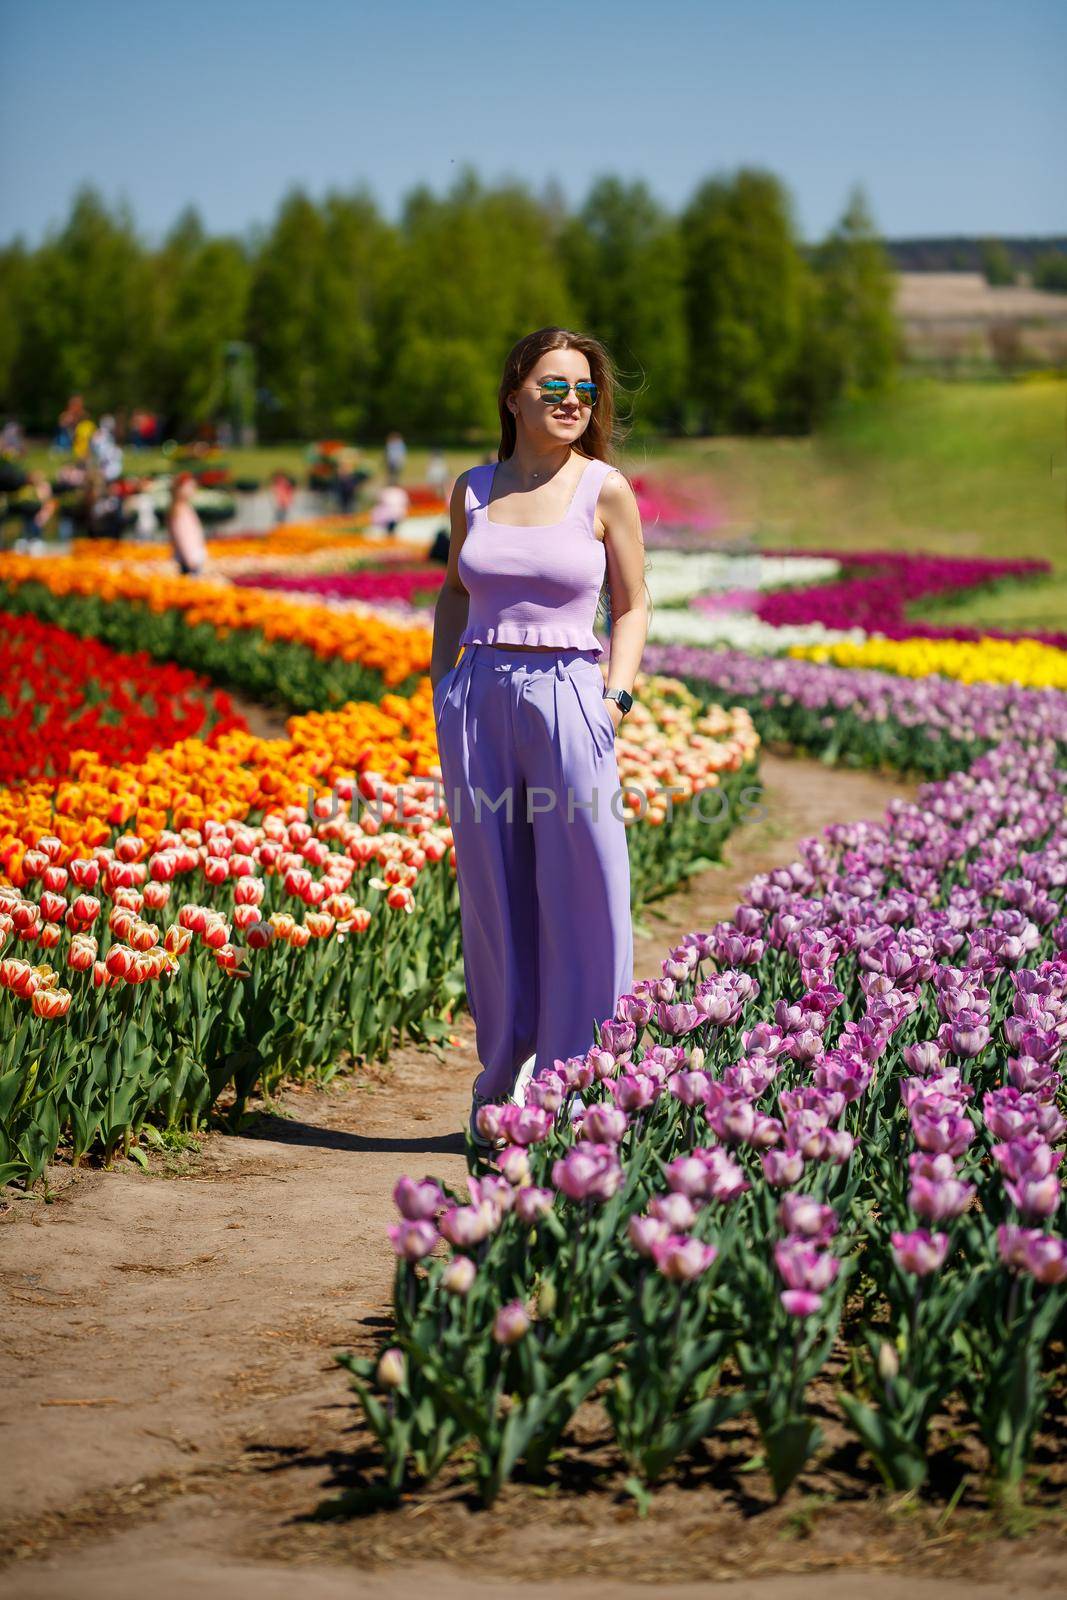 A young woman in a pink suit stands in a blooming field of tulips. Spring time